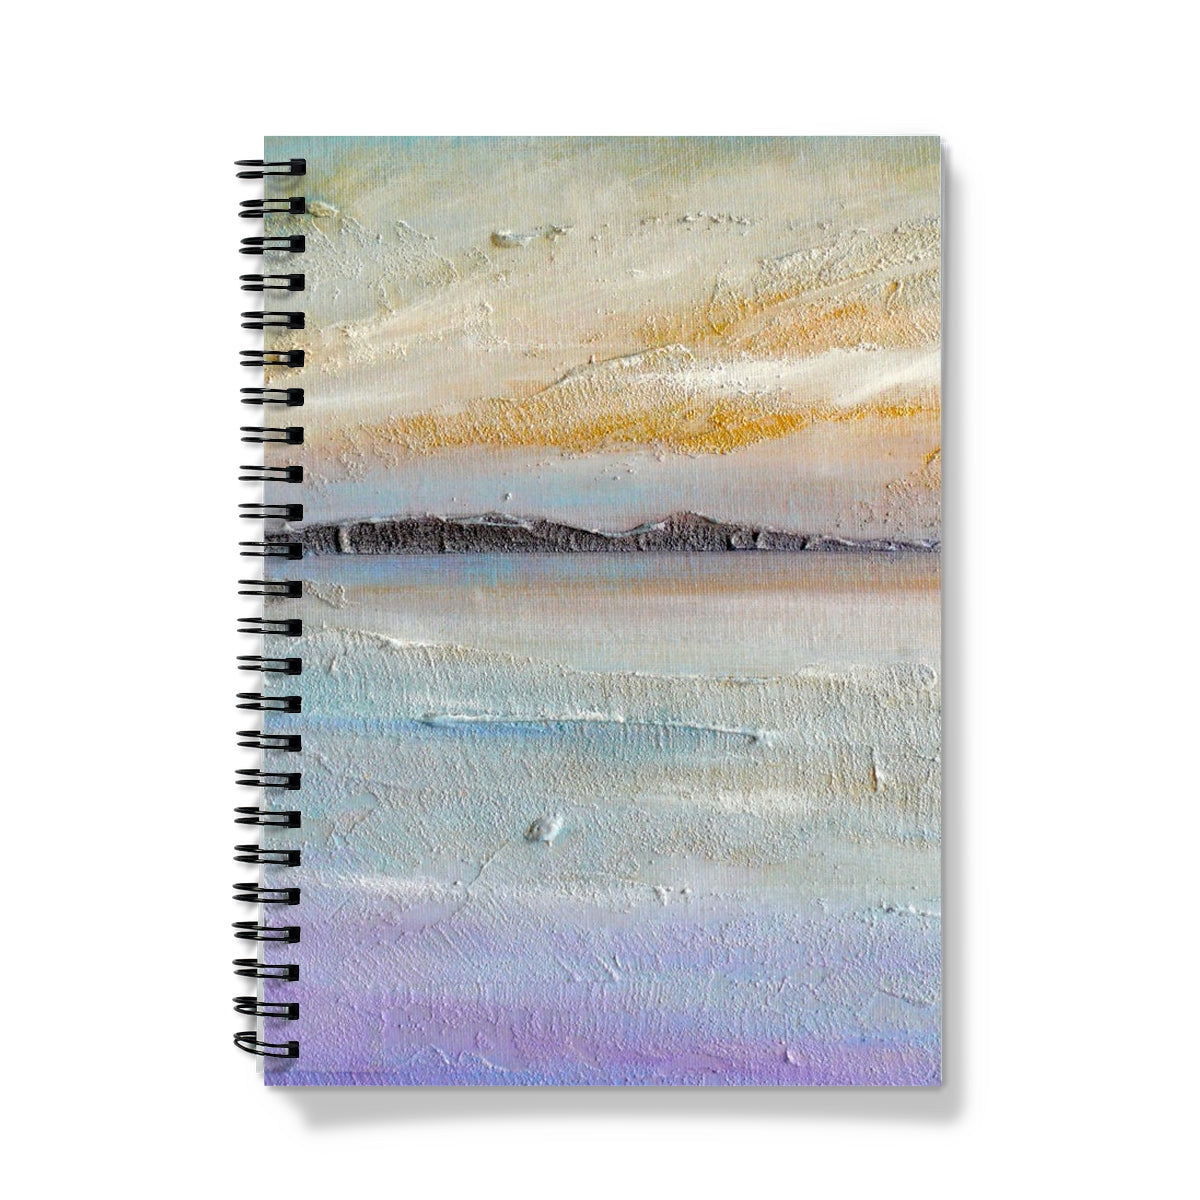 Sollas Beach South Uist Art Gifts Notebook-Journals & Notebooks-Hebridean Islands Art Gallery-A4-Lined-Paintings, Prints, Homeware, Art Gifts From Scotland By Scottish Artist Kevin Hunter